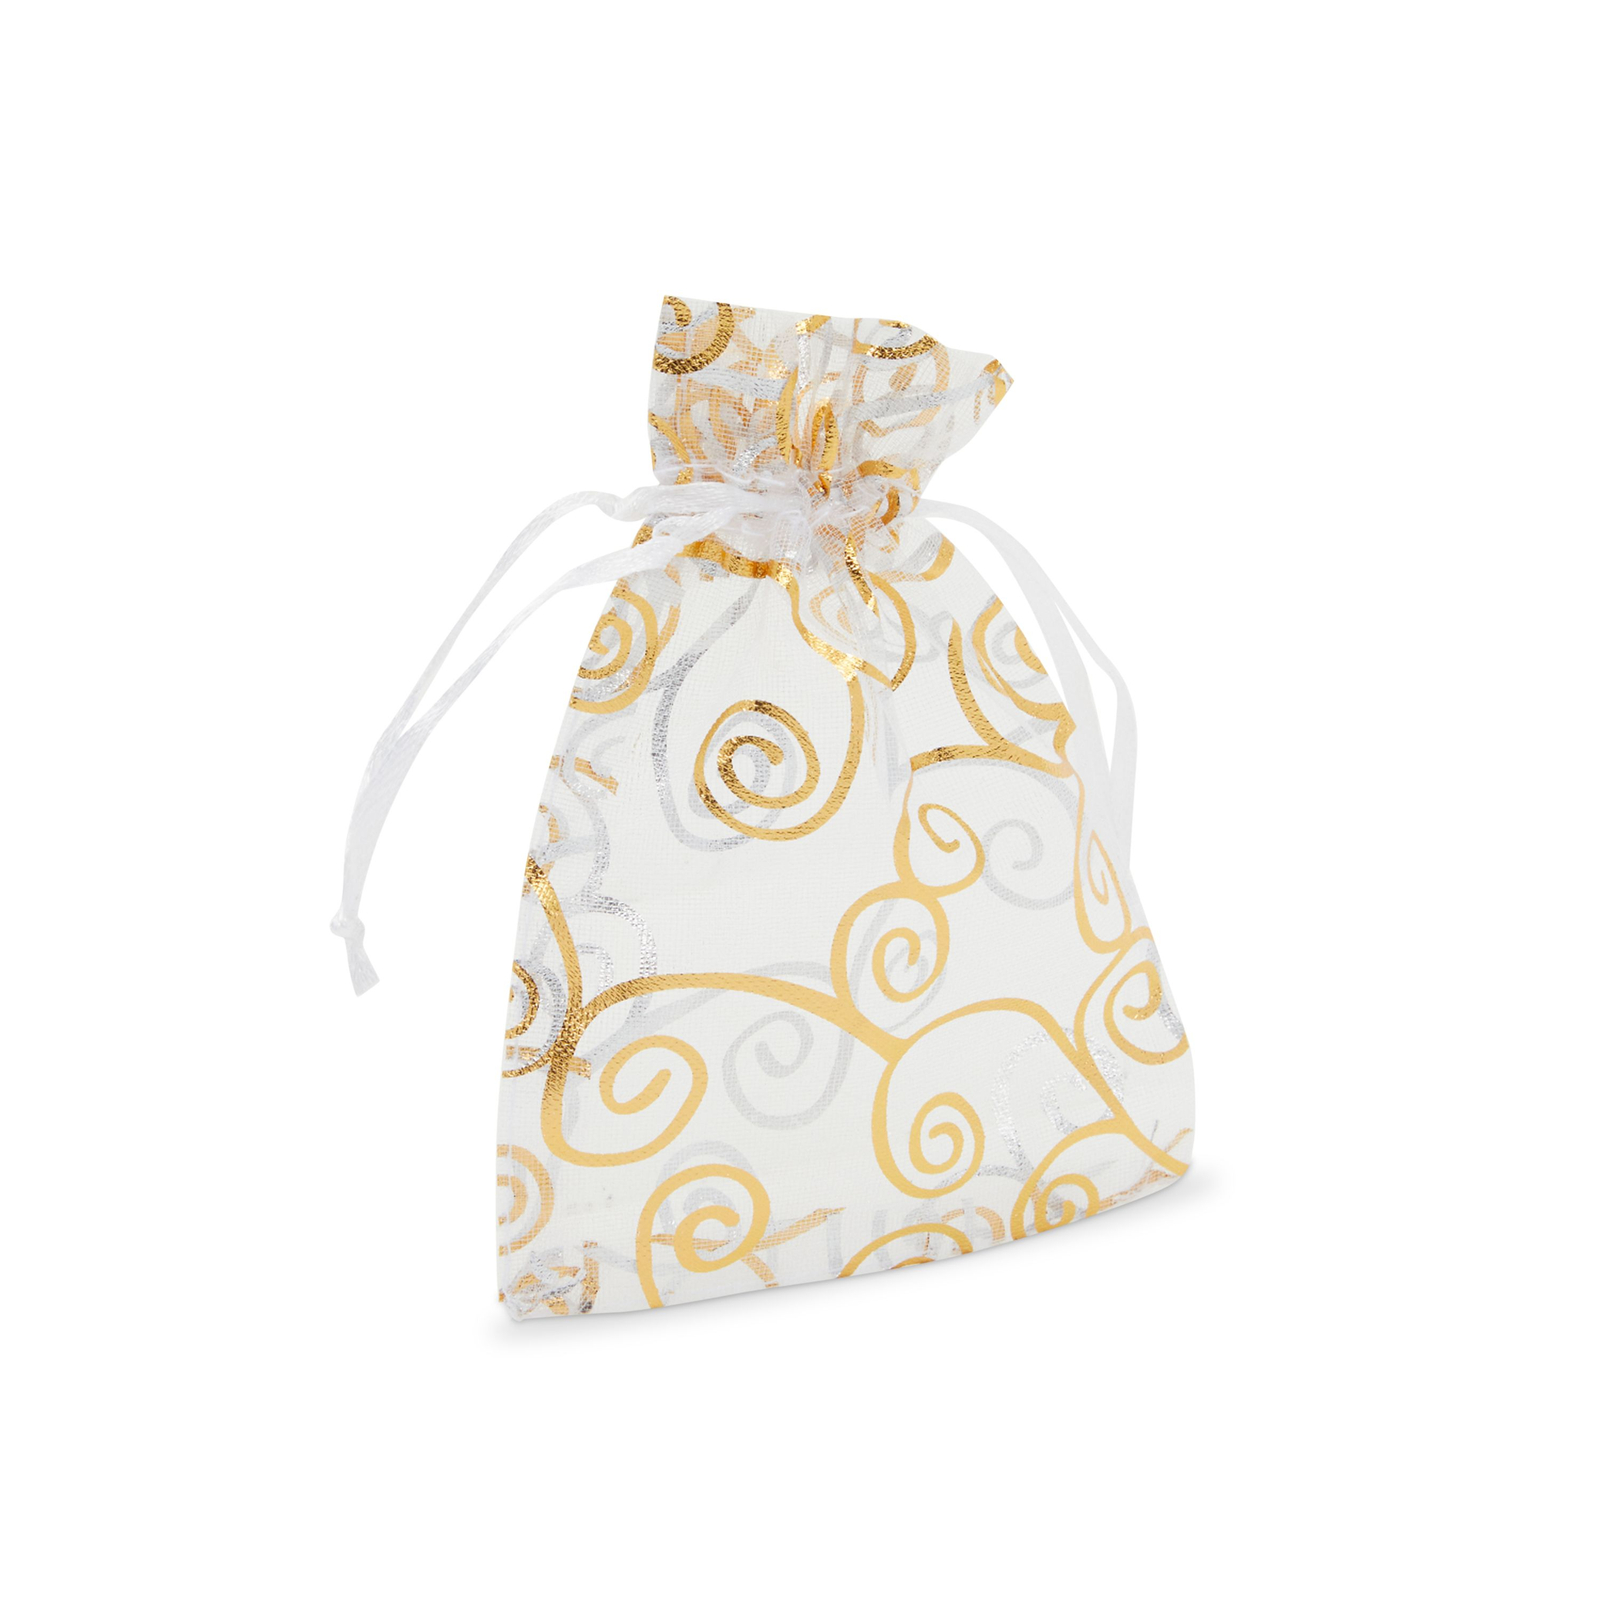 Organza Bags - 120-Count Satin Drawstring Organza Pouches with Gold Swirl Design, Mesh Favor Bags for Baby Showers, Wedding Gifts, Special Occasions, Party Favors, 3.5 x 4.75 inches - image 5 of 5